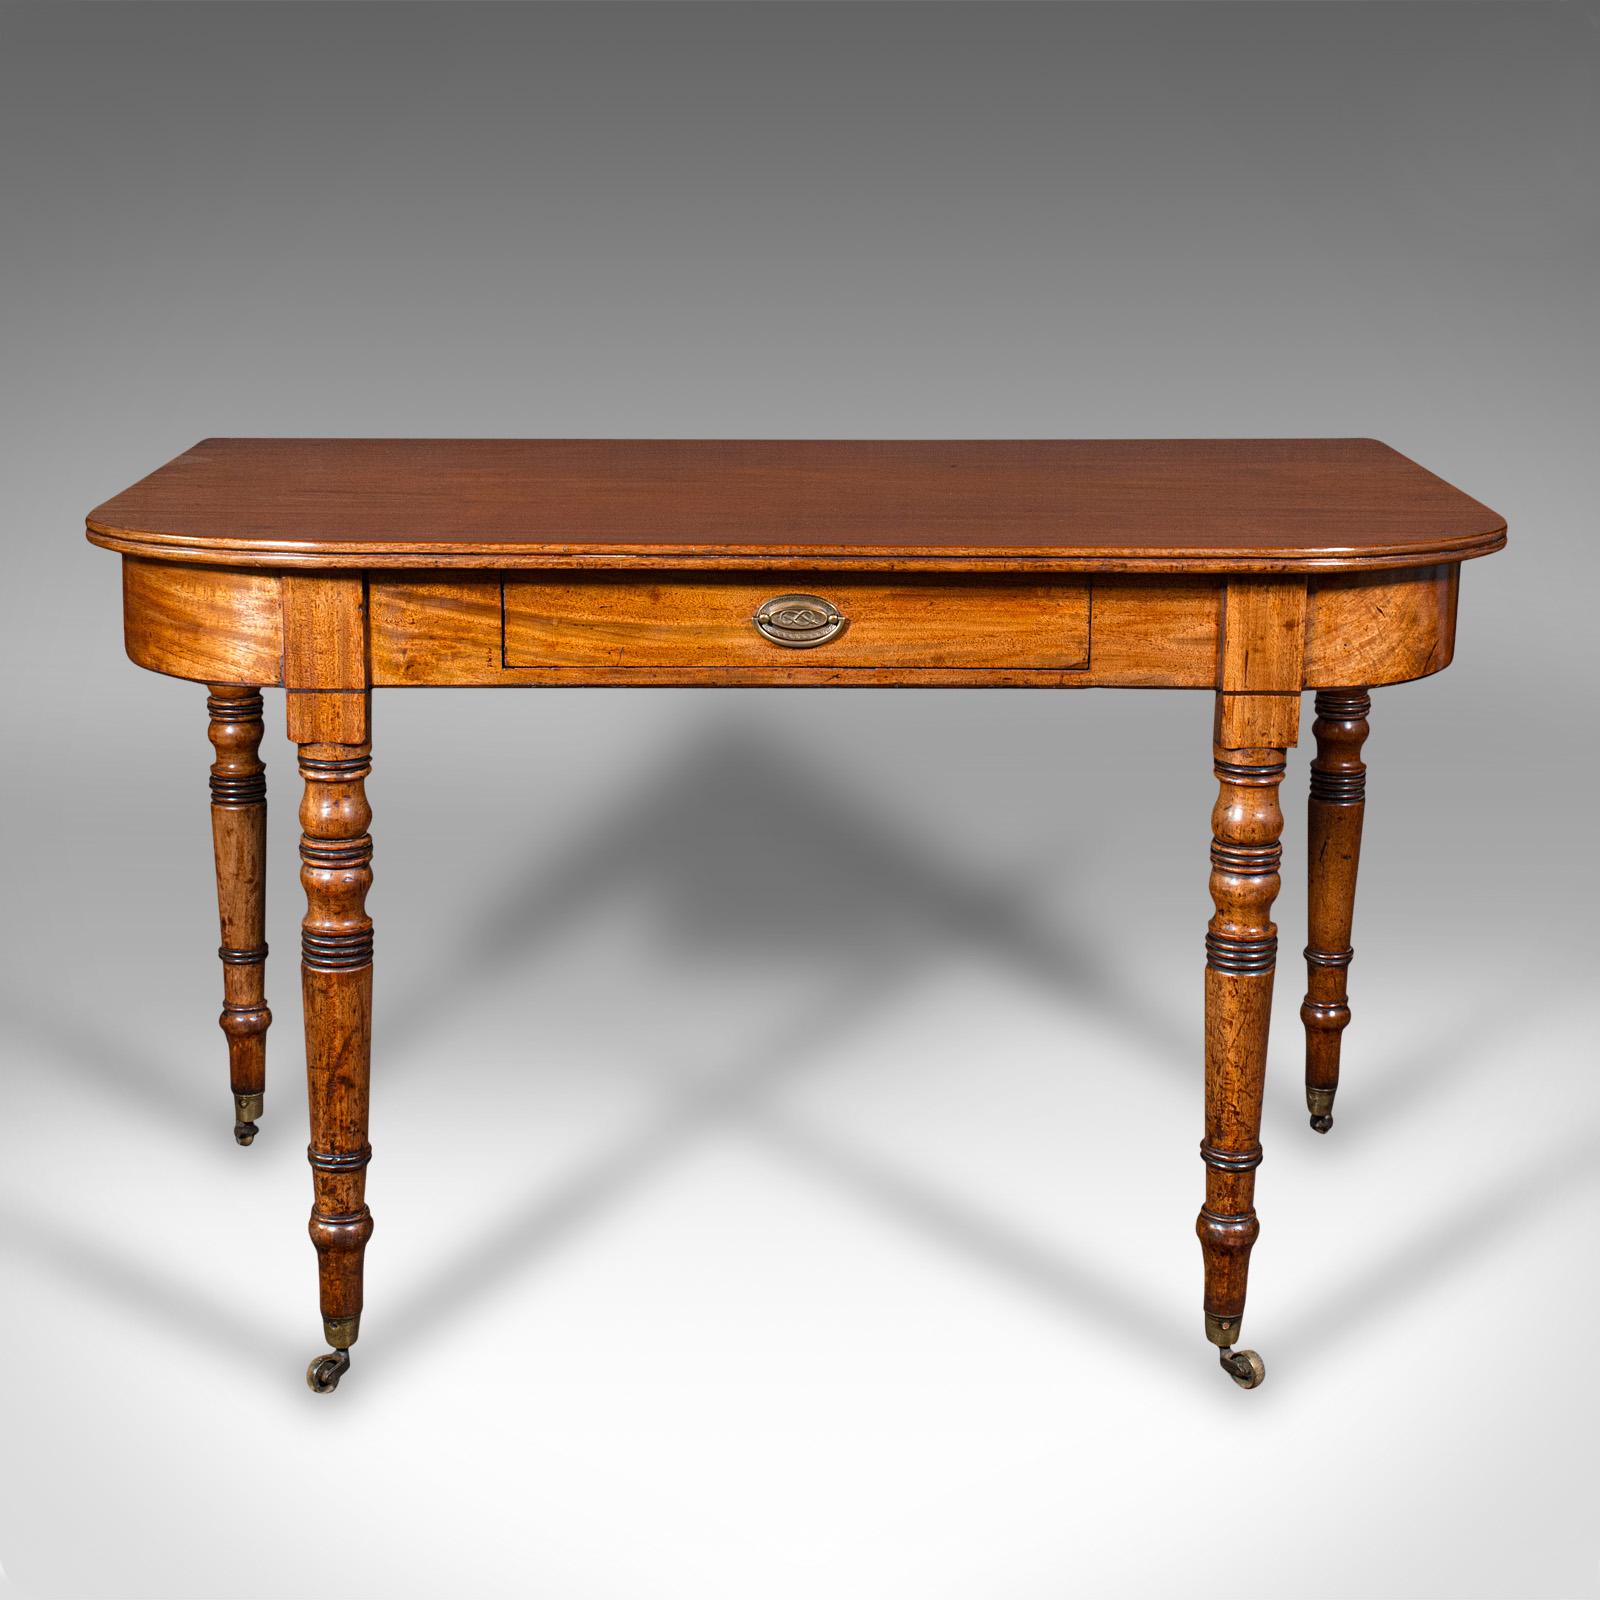 This is a pair of antique demi-lune end tables. An English, mahogany side table, dating to the Regency period, circa 1820.

Superior quality tables, with delightful Regency craftsmanship
Displaying a desirable aged patina and in good order
Select